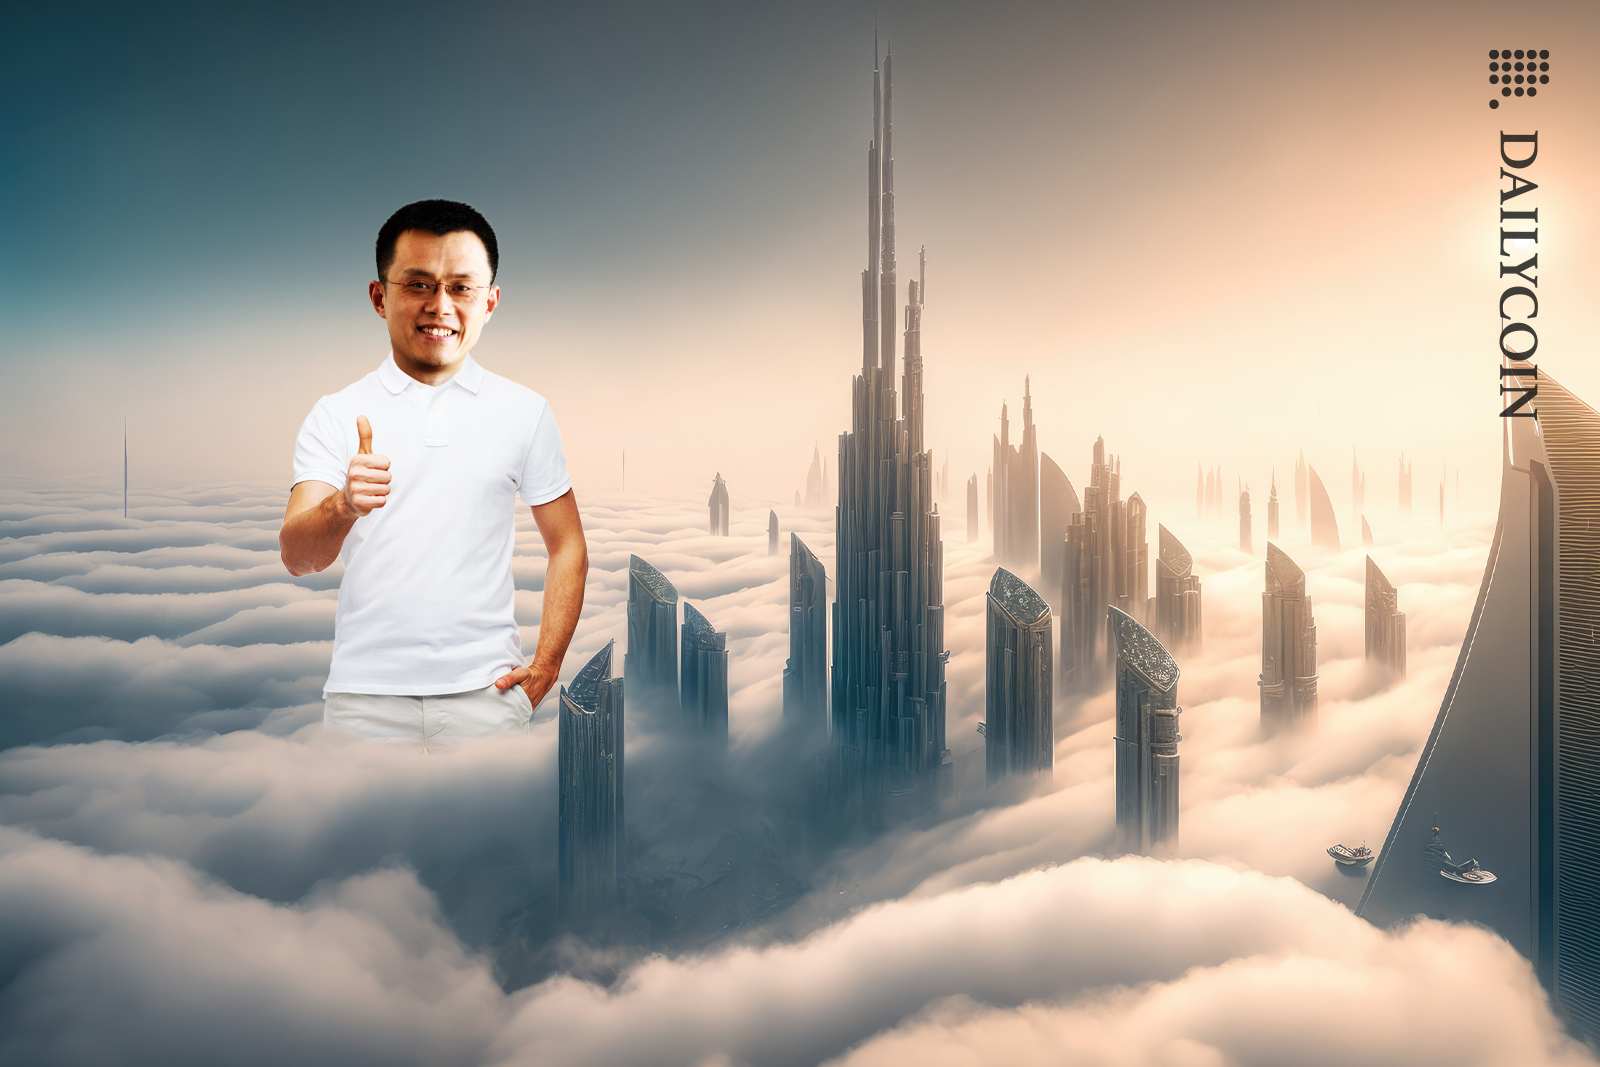 Binance CZ standing in the clouds of Dubai skyline showing thumbs up.